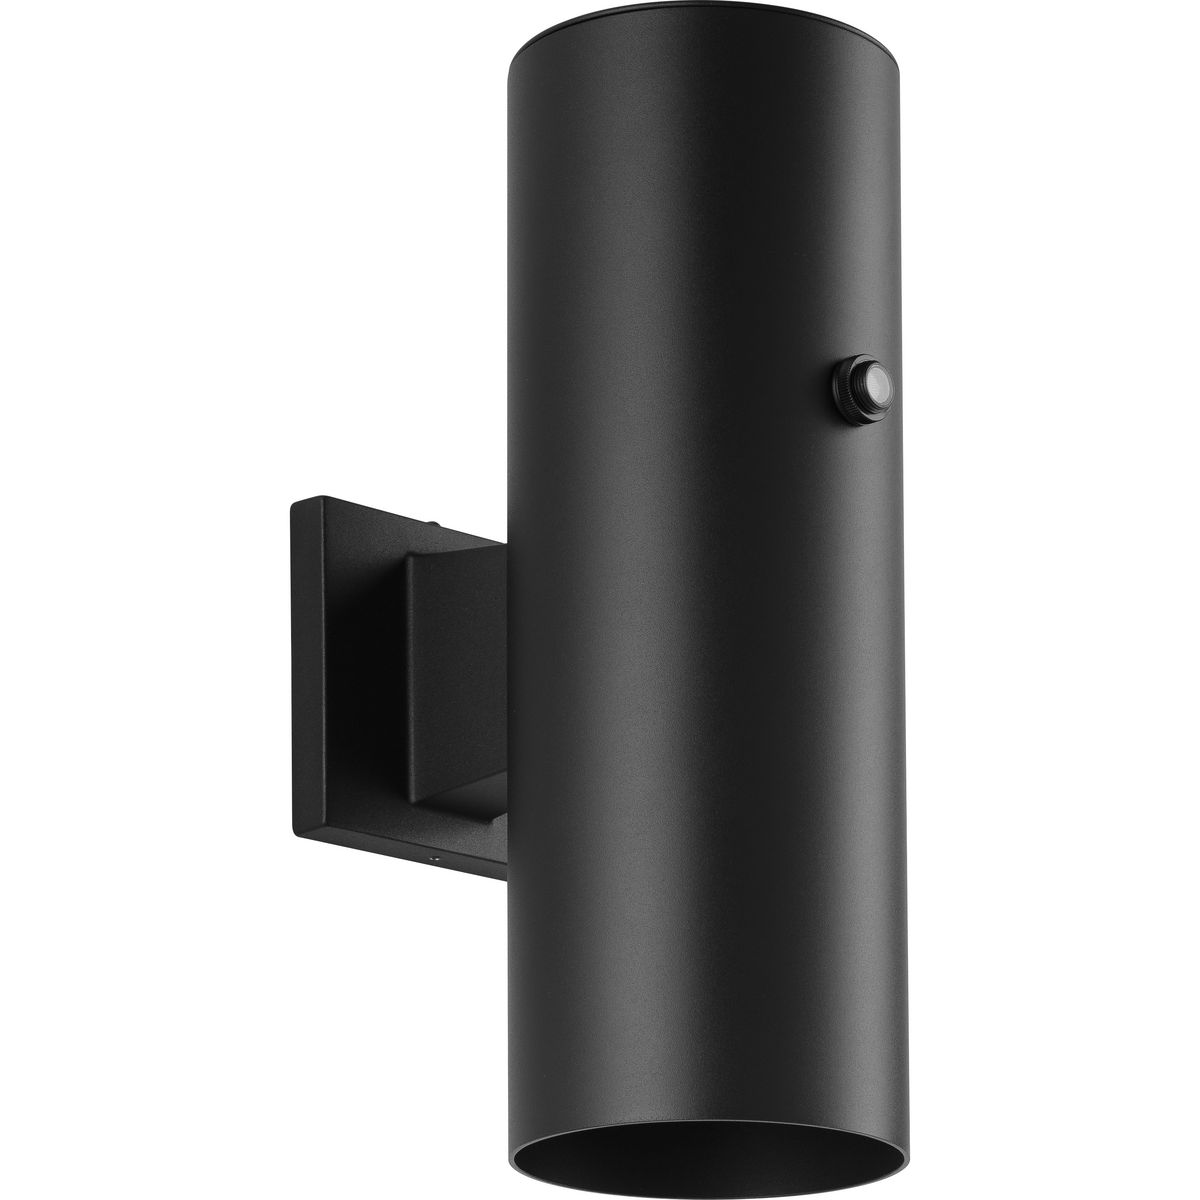 5"  Black LED Outdoor Aluminum Up/Down Wall Mount Cylinder with Photocell - image 1 of 3